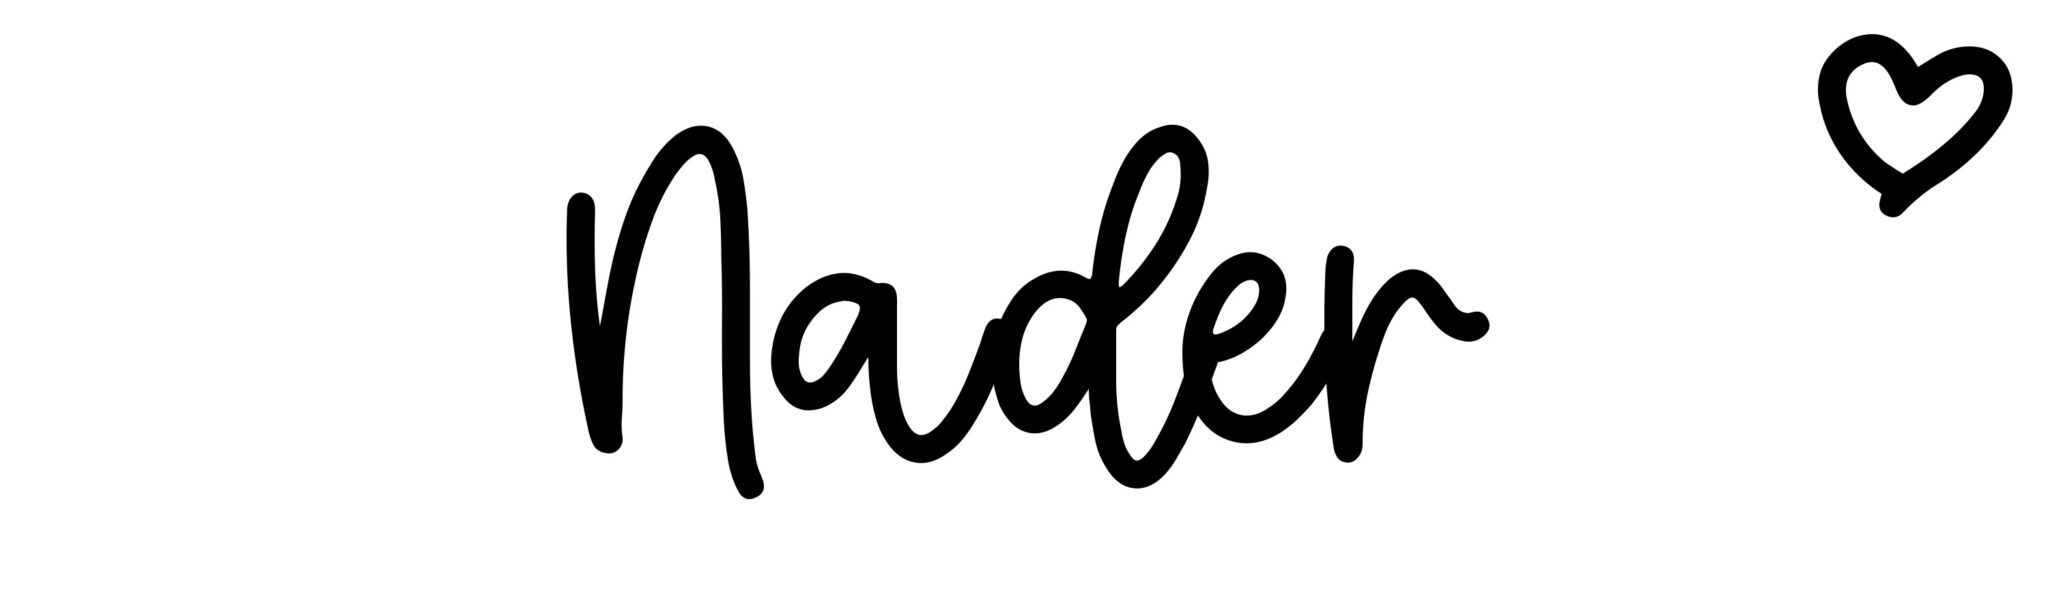 Nader - Name meaning, origin, variations and more